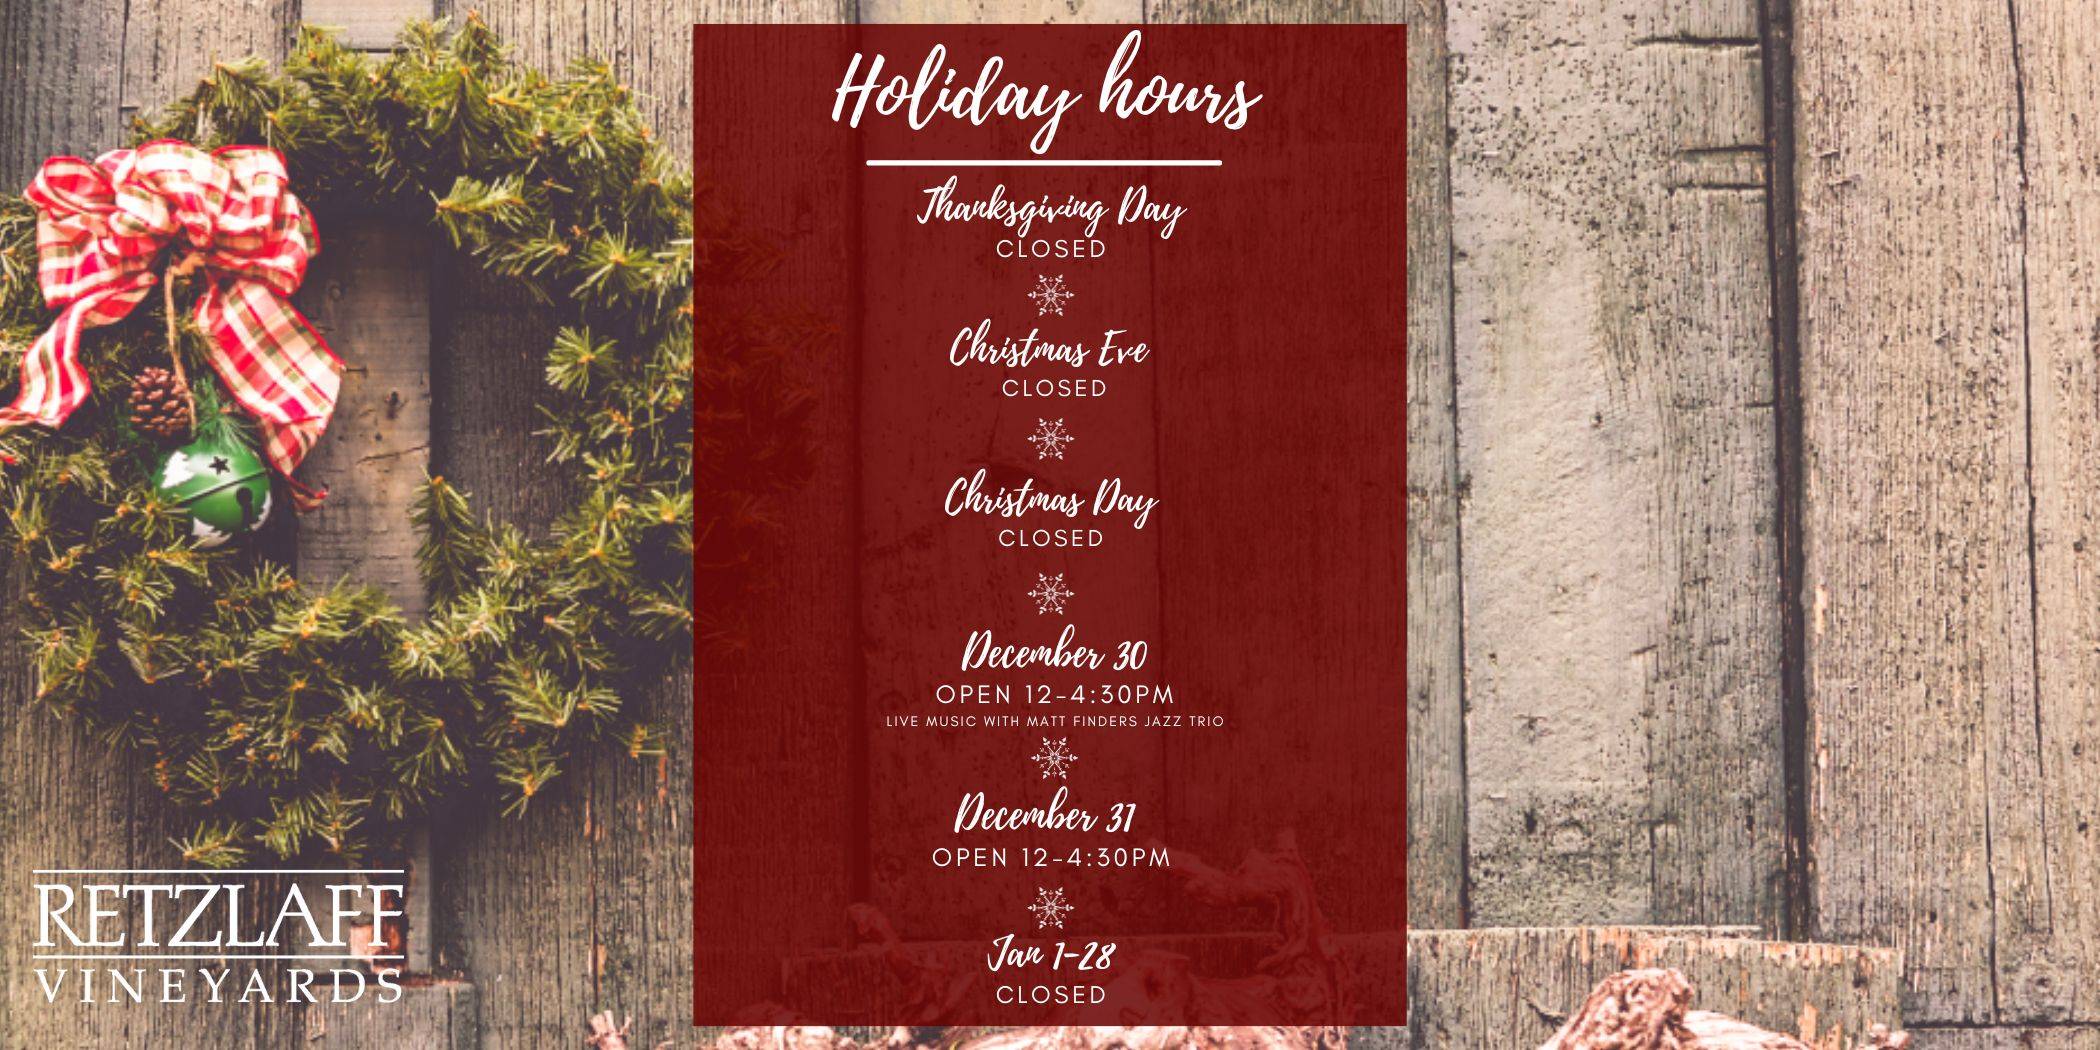 Holiday hours 2023: Thanksgiving Day-closed
Open November 24, 12-4:30 pm
Christmas Eve and Christmas Day - closed
Open December 30, 12-4:30 pm 
Open New Year's Eve  12-4:30
Closed January 1-26
